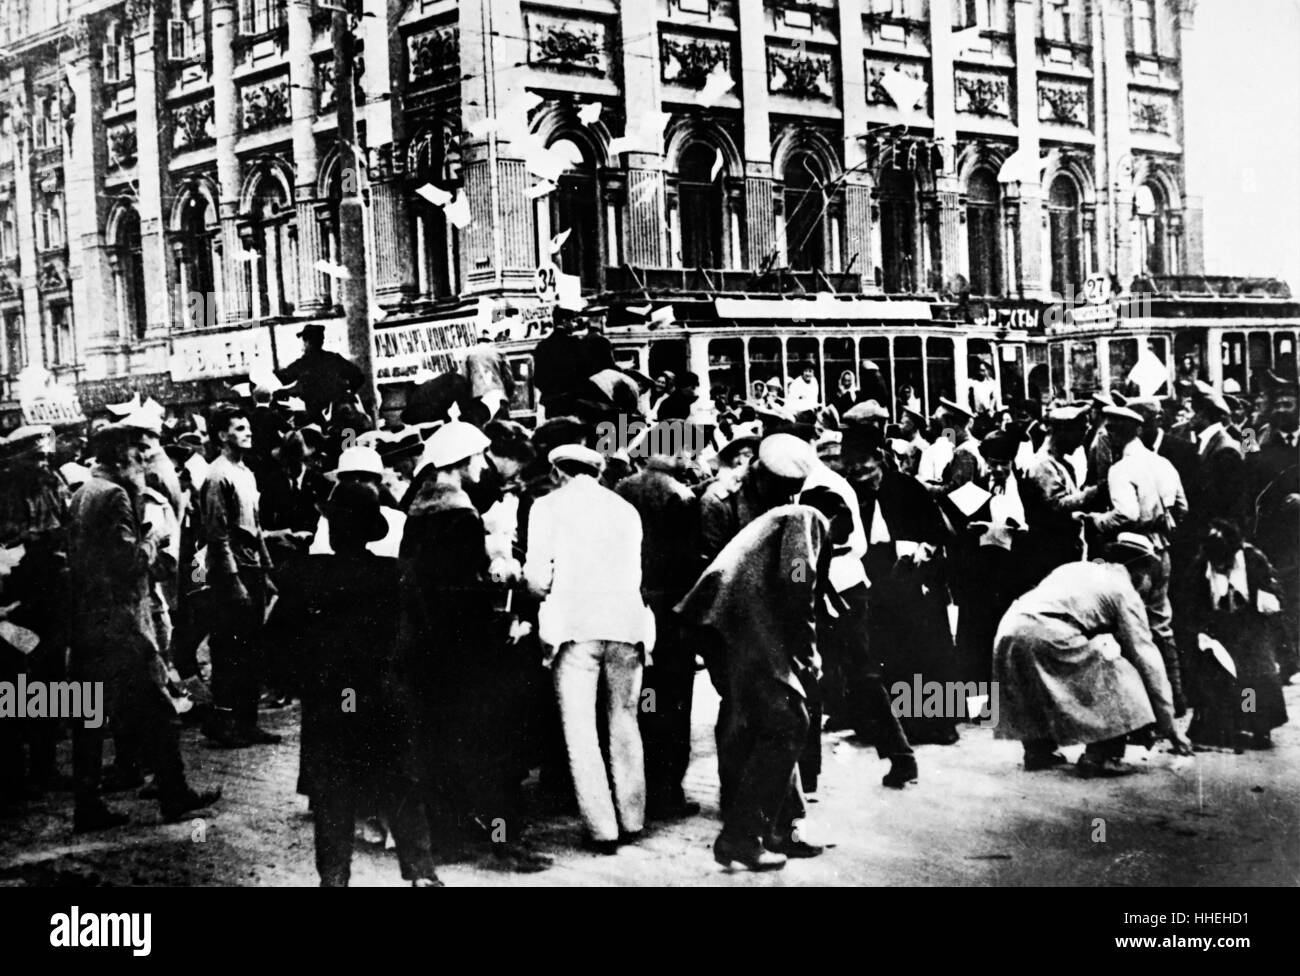 Photograph of crowds distributing flyers in Moscow during the Russian Revolution. Dated 20th Century Stock Photo